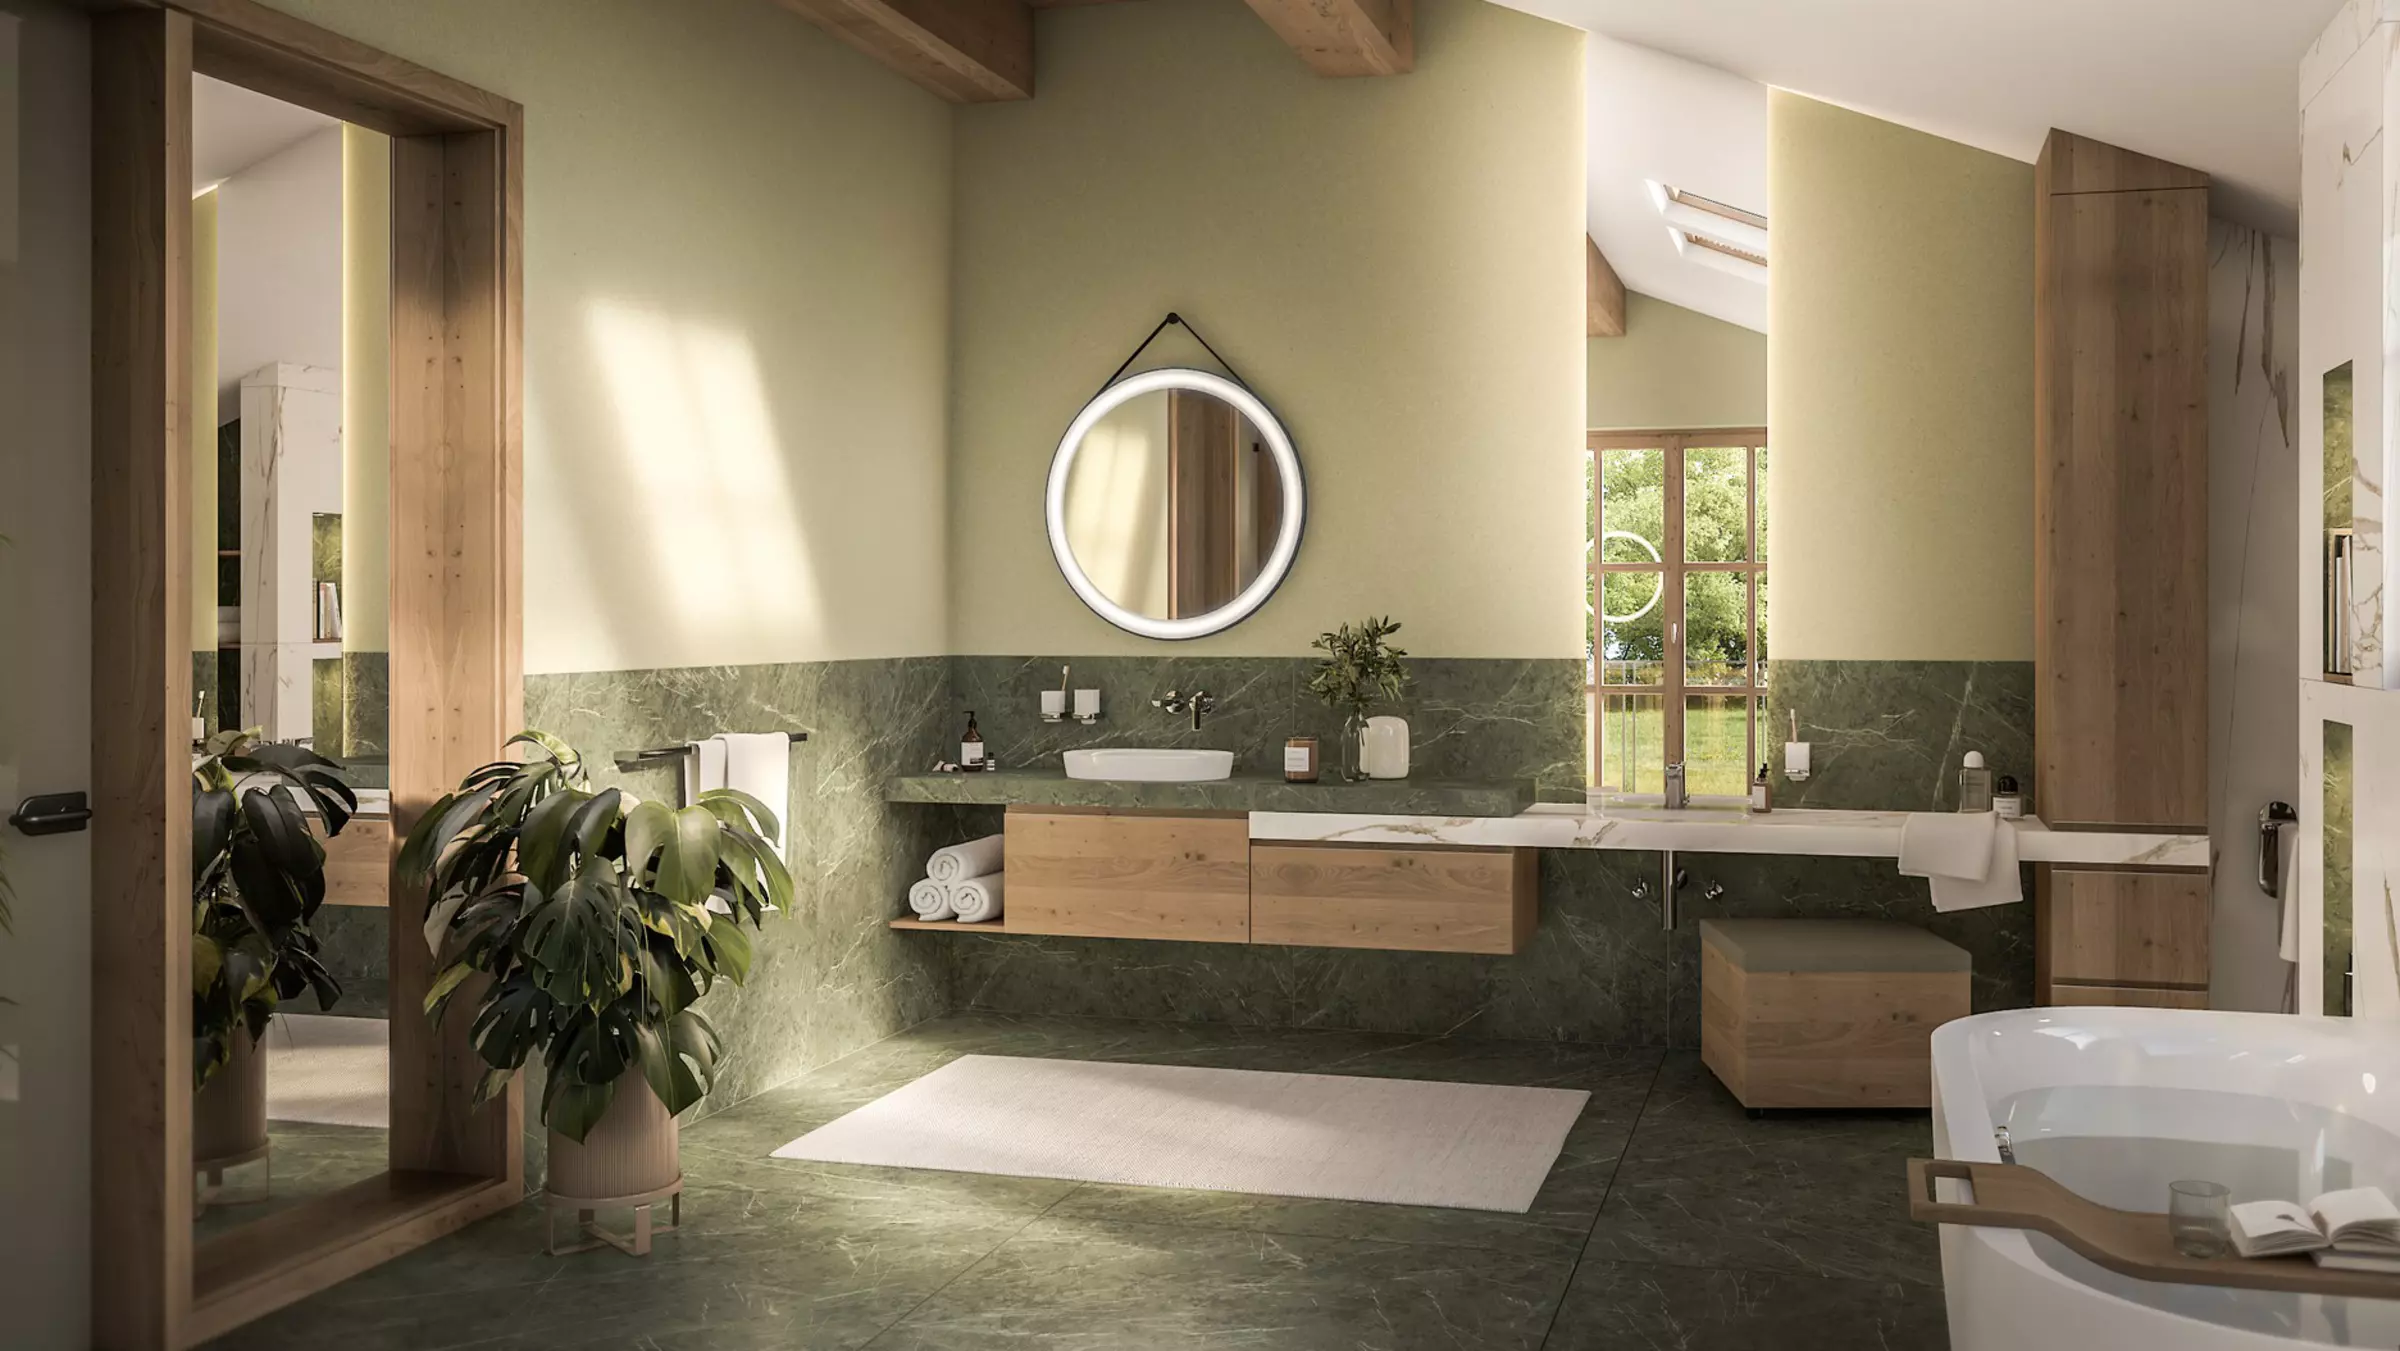 Bathroom in shades of green with wooden furniture, round mirror and washbasin.